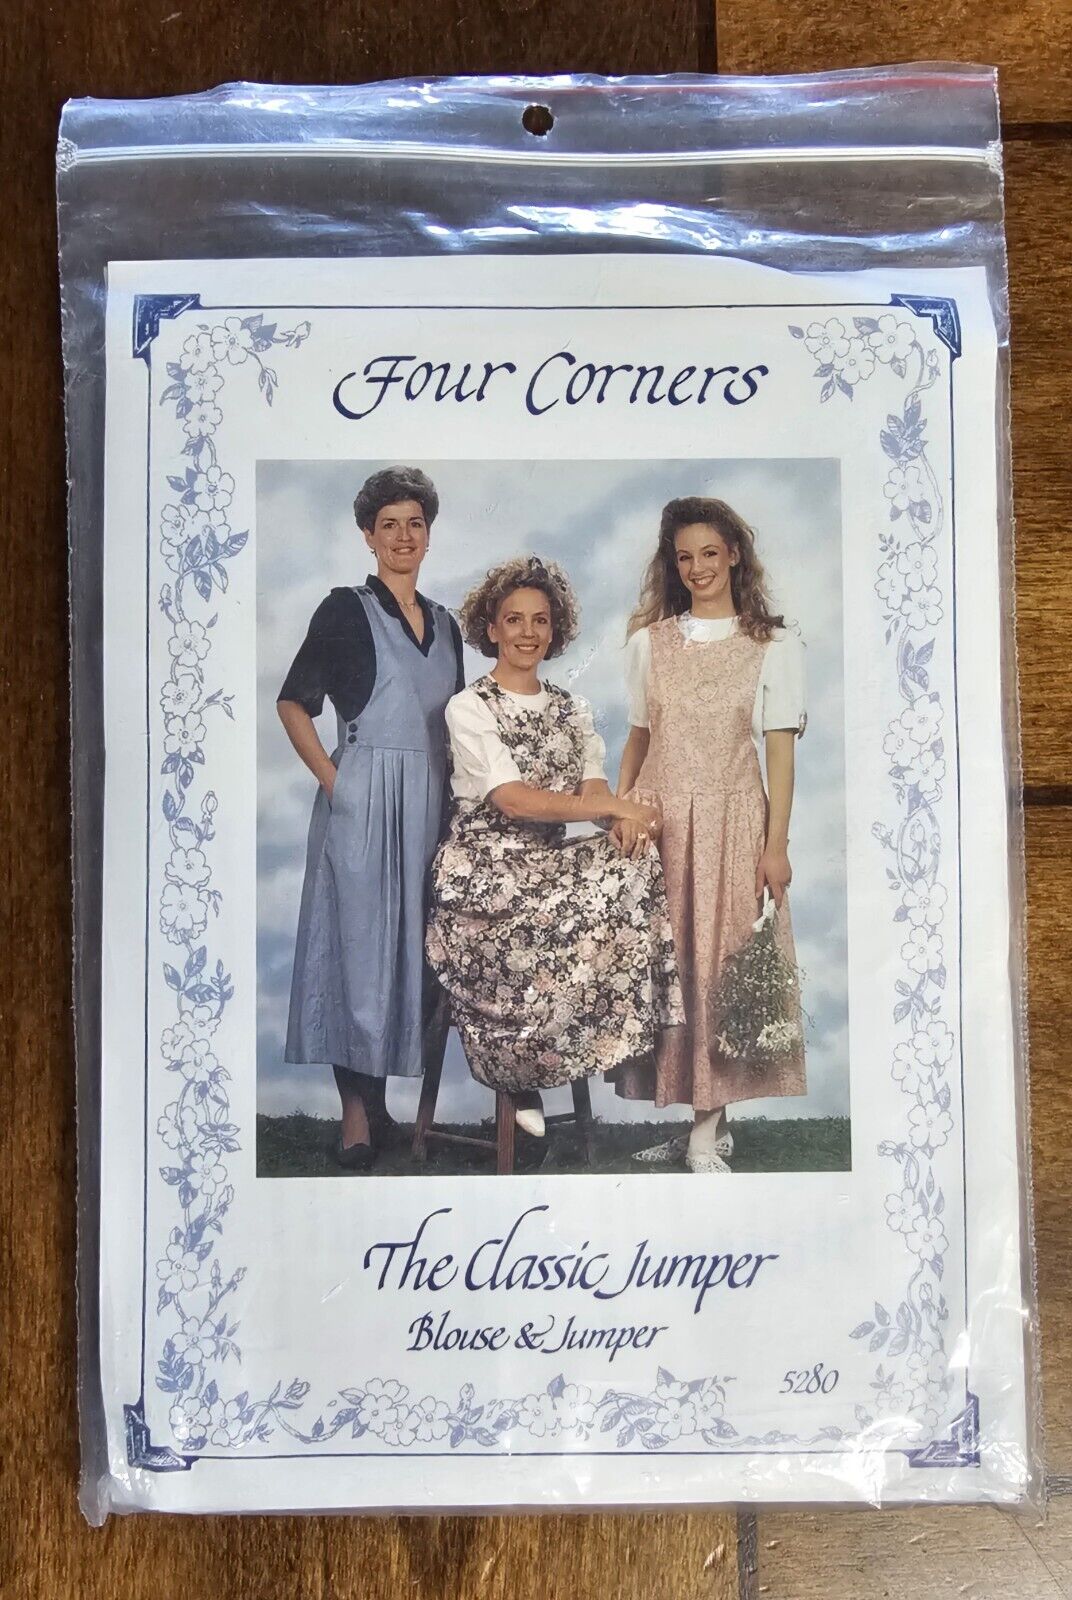 Four Corners The Classic Jumper (Blouse & Jumper) #5280 Sizes Petite to X-Large